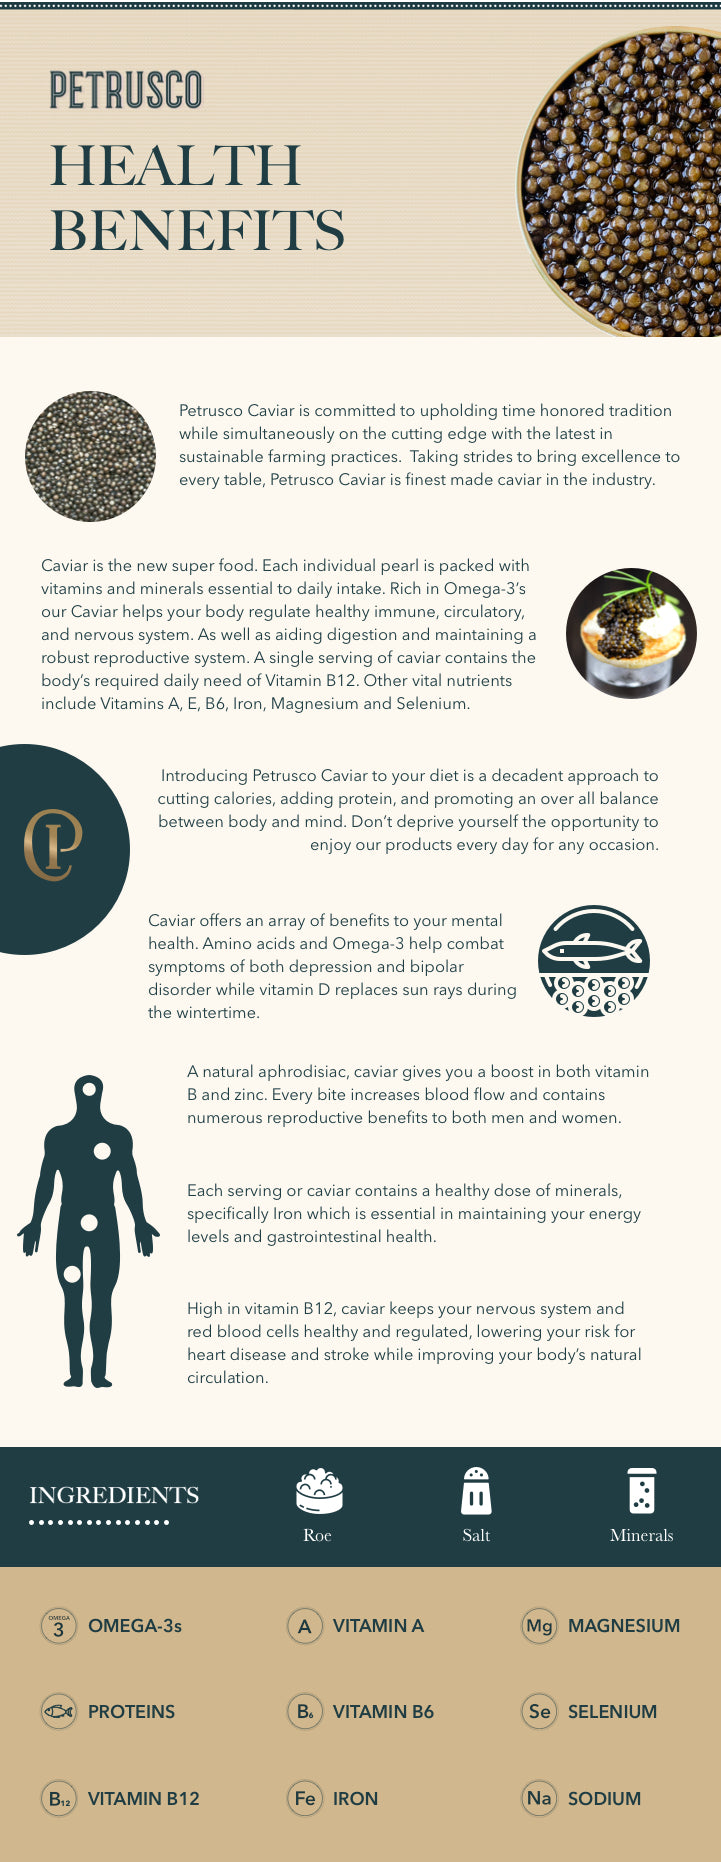 an infographic about Petrusco's caviar health benefits